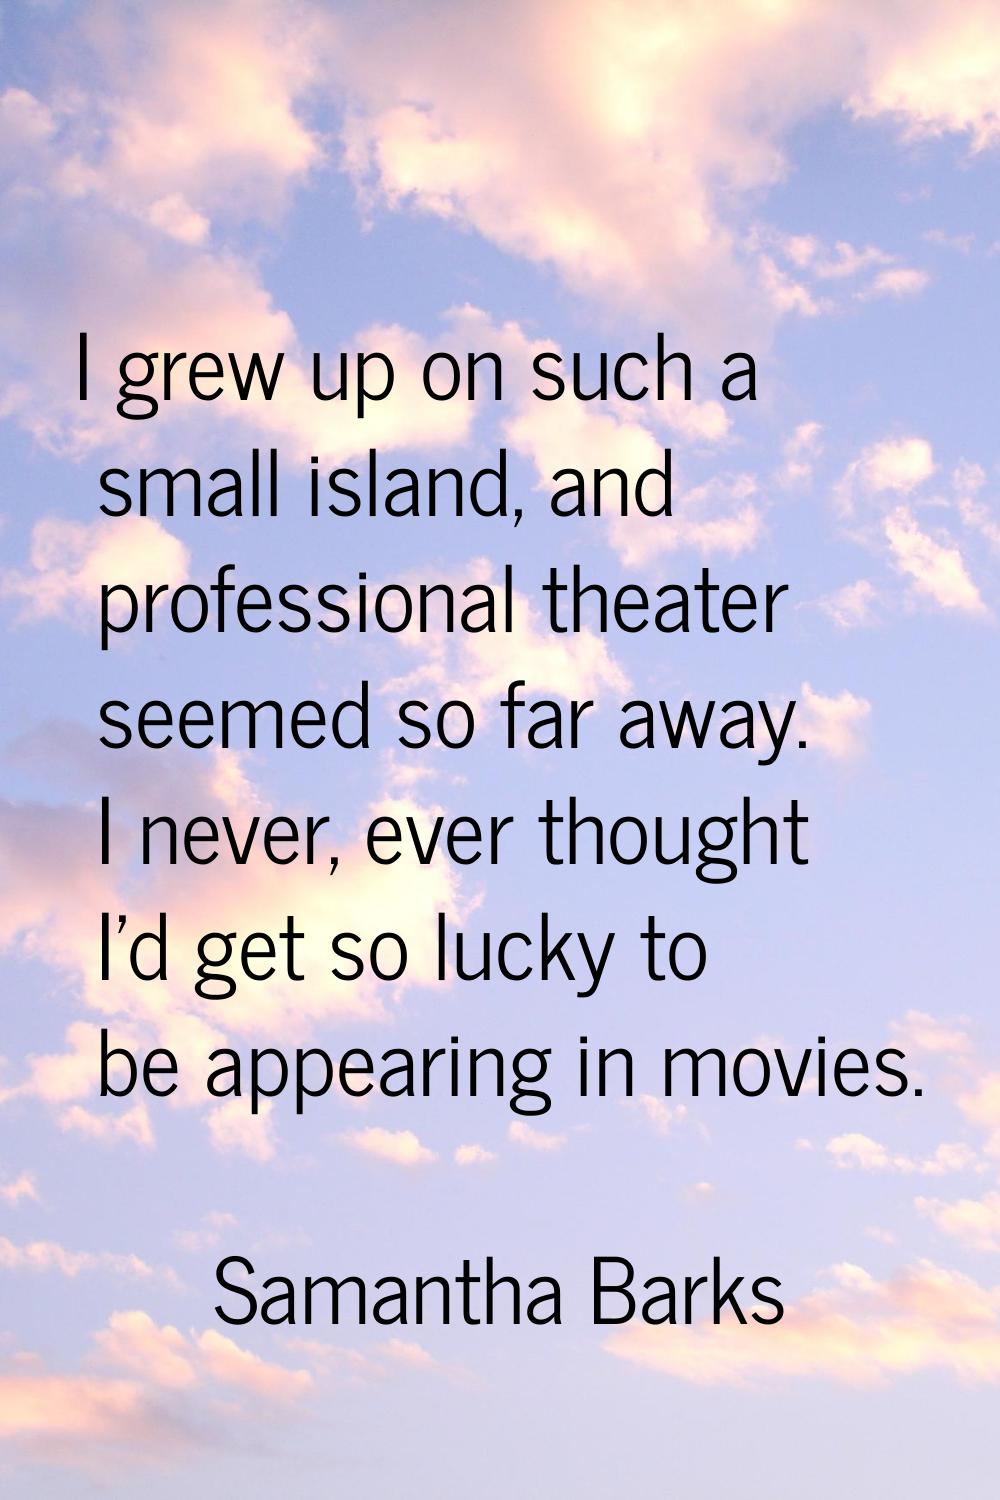 I grew up on such a small island, and professional theater seemed so far away. I never, ever though